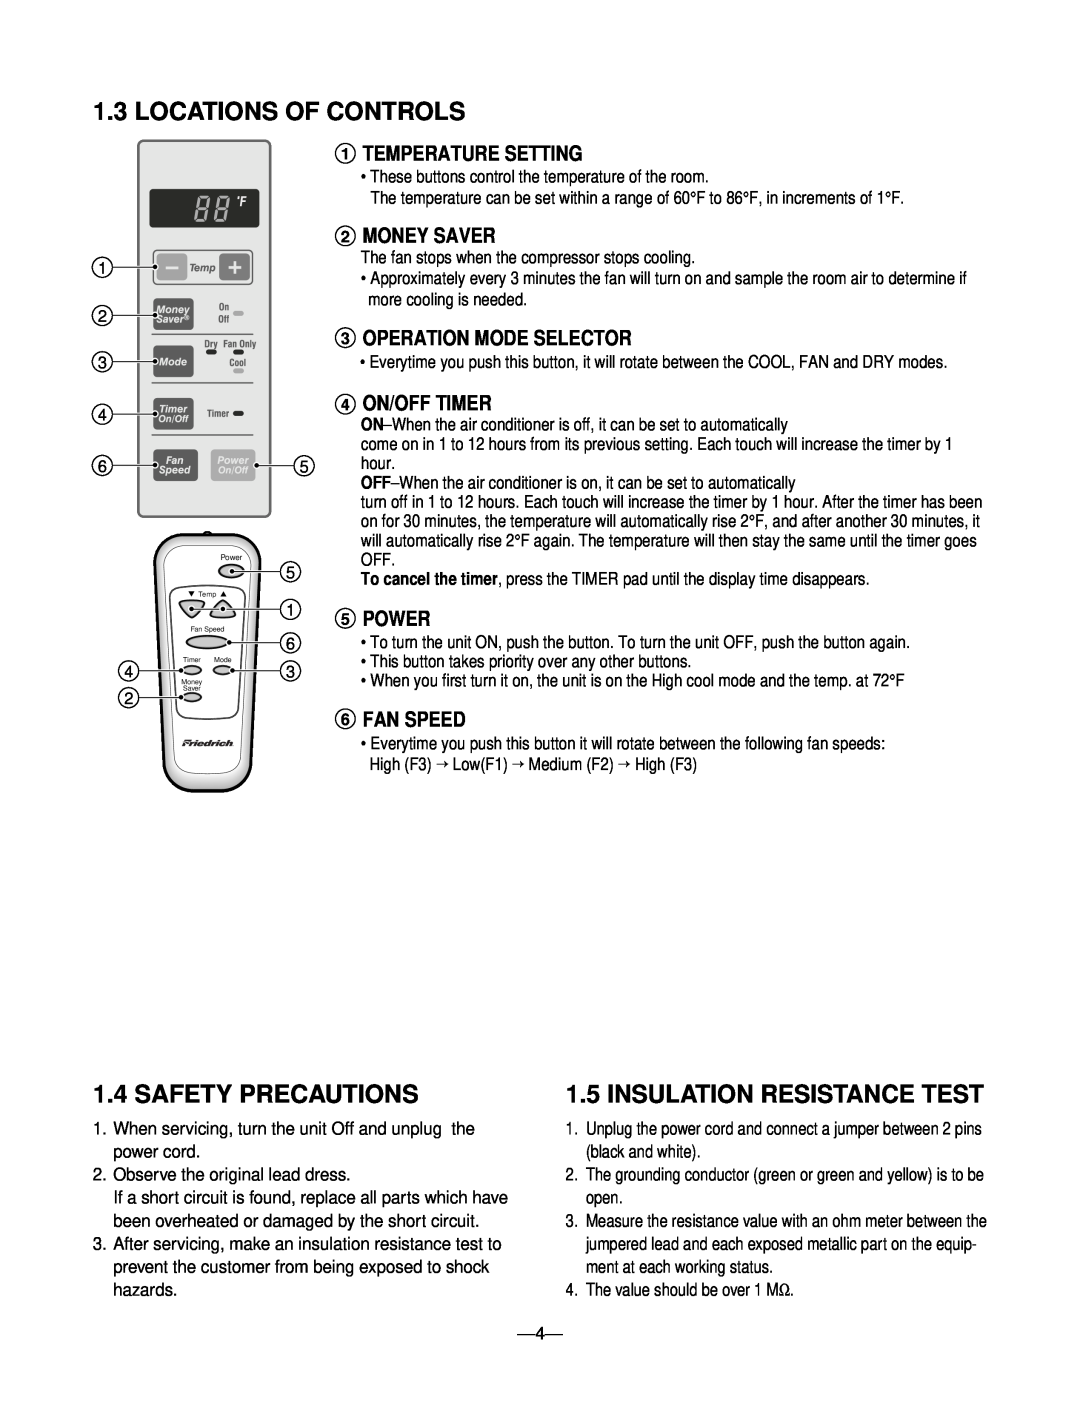 Friedrich CP05A10 Locations Of Controls, Safety Precautions, Insulation Resistance Test, 1TEMPERATURE SETTING, 5POWER 